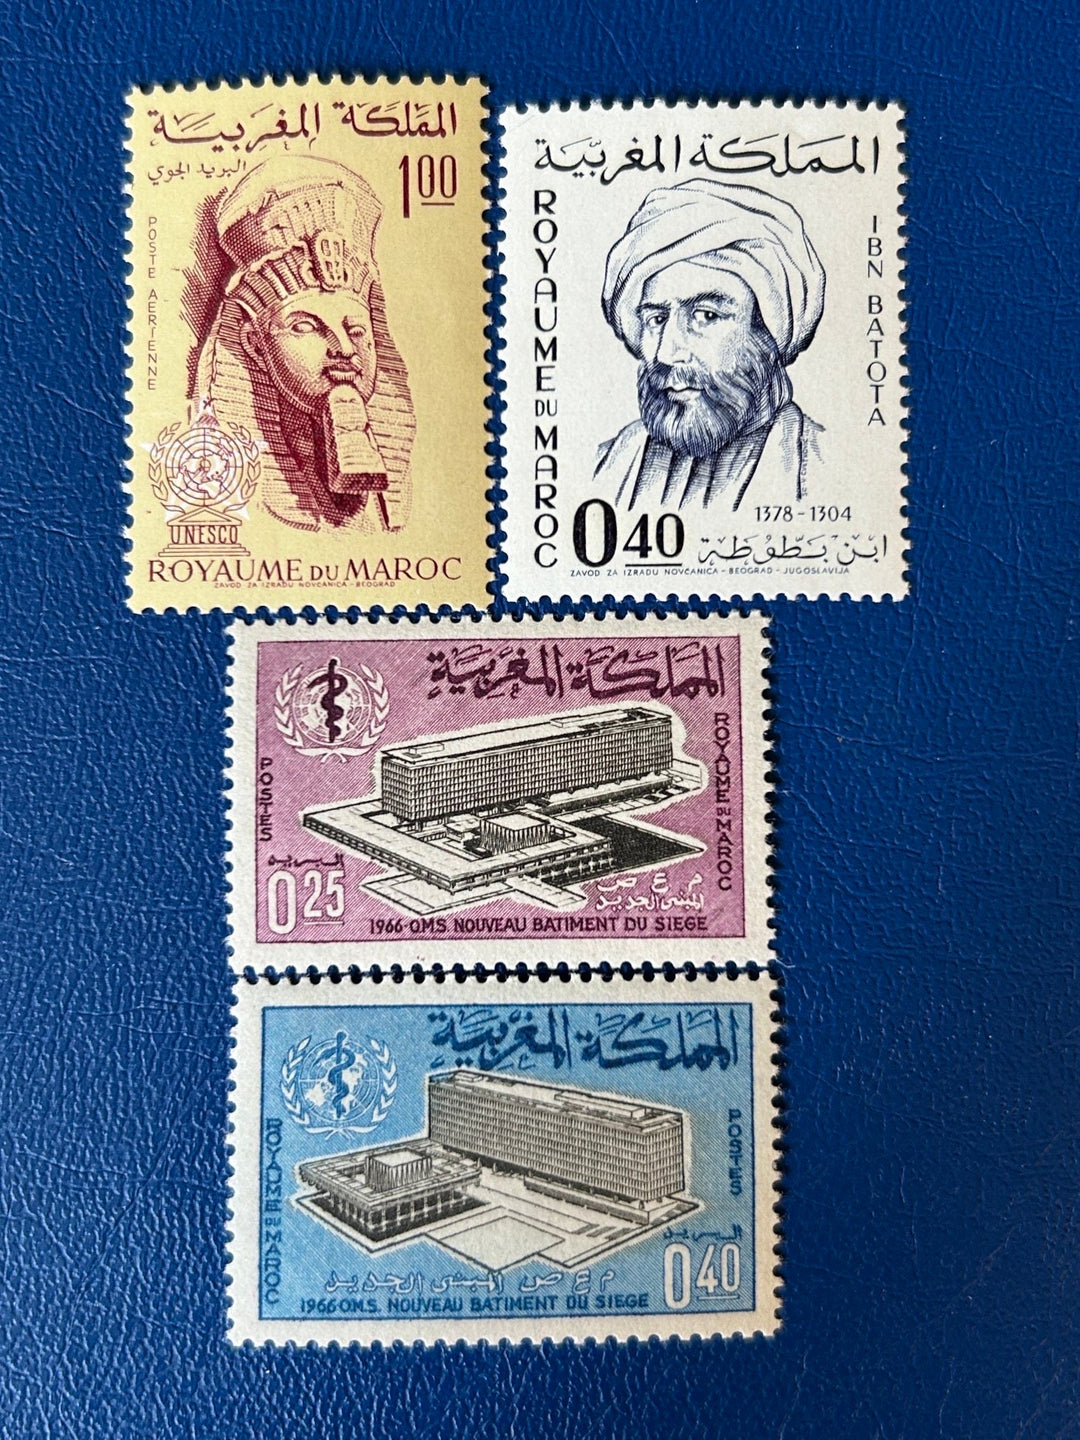 Morocco - Original Vintage Postage Stamps- 1963/66 - UNESCO & WHO - for the collector or crafter